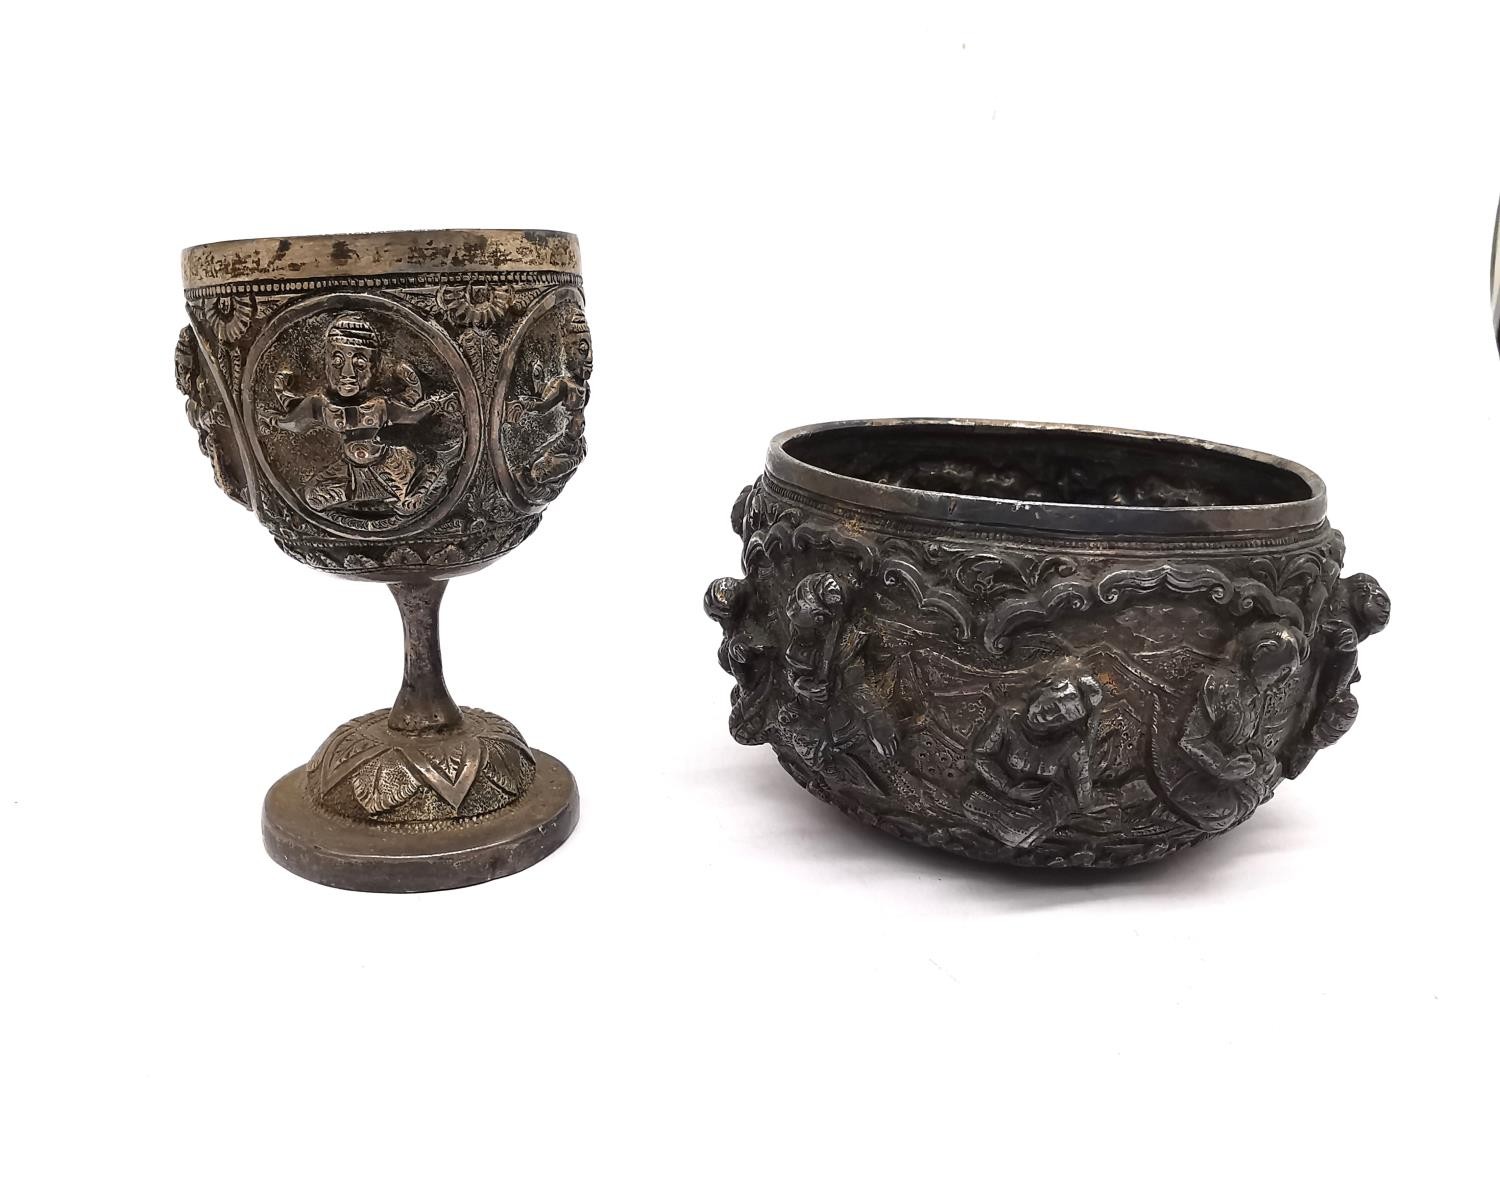 Two 19th century Burmese white metal repousse items, a sculptural figural design bowl with Burmese